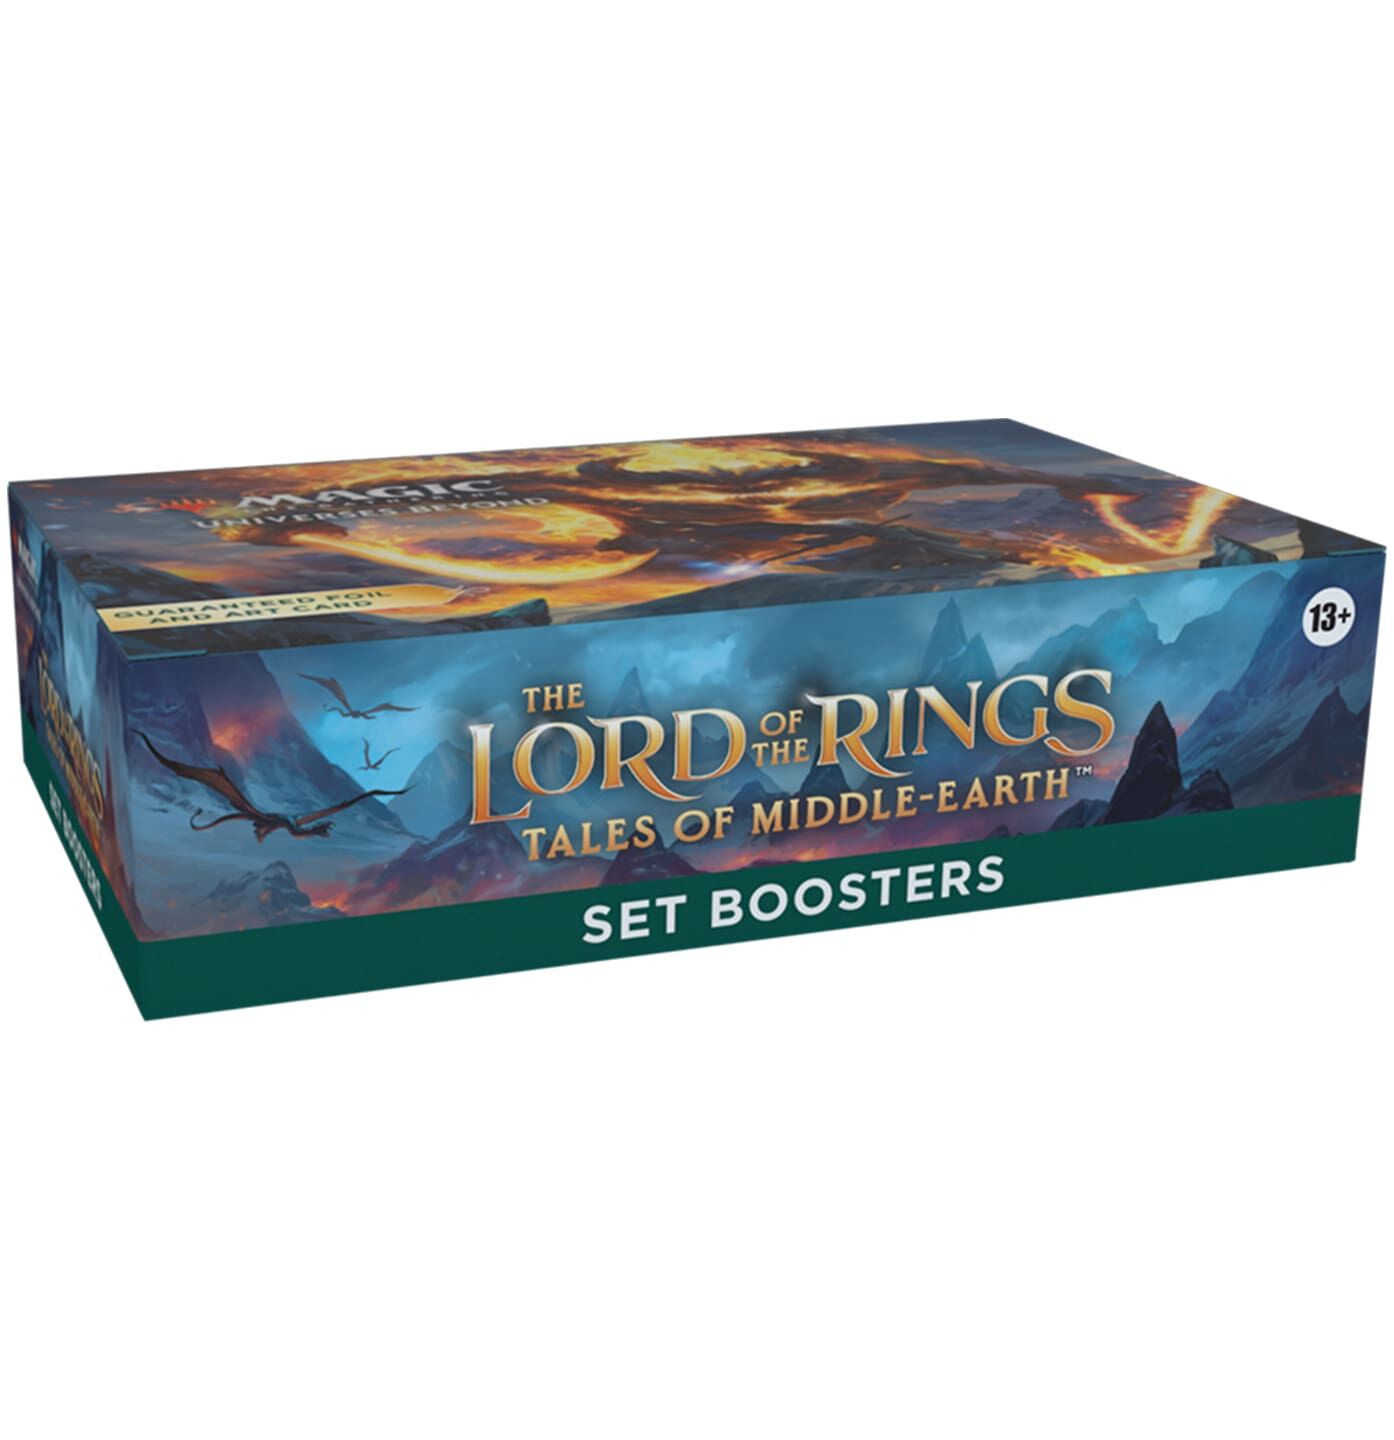 The Lord of the Rings: Tales of Middle-earth™ Set Booster Display - Magic the Gathering - EN